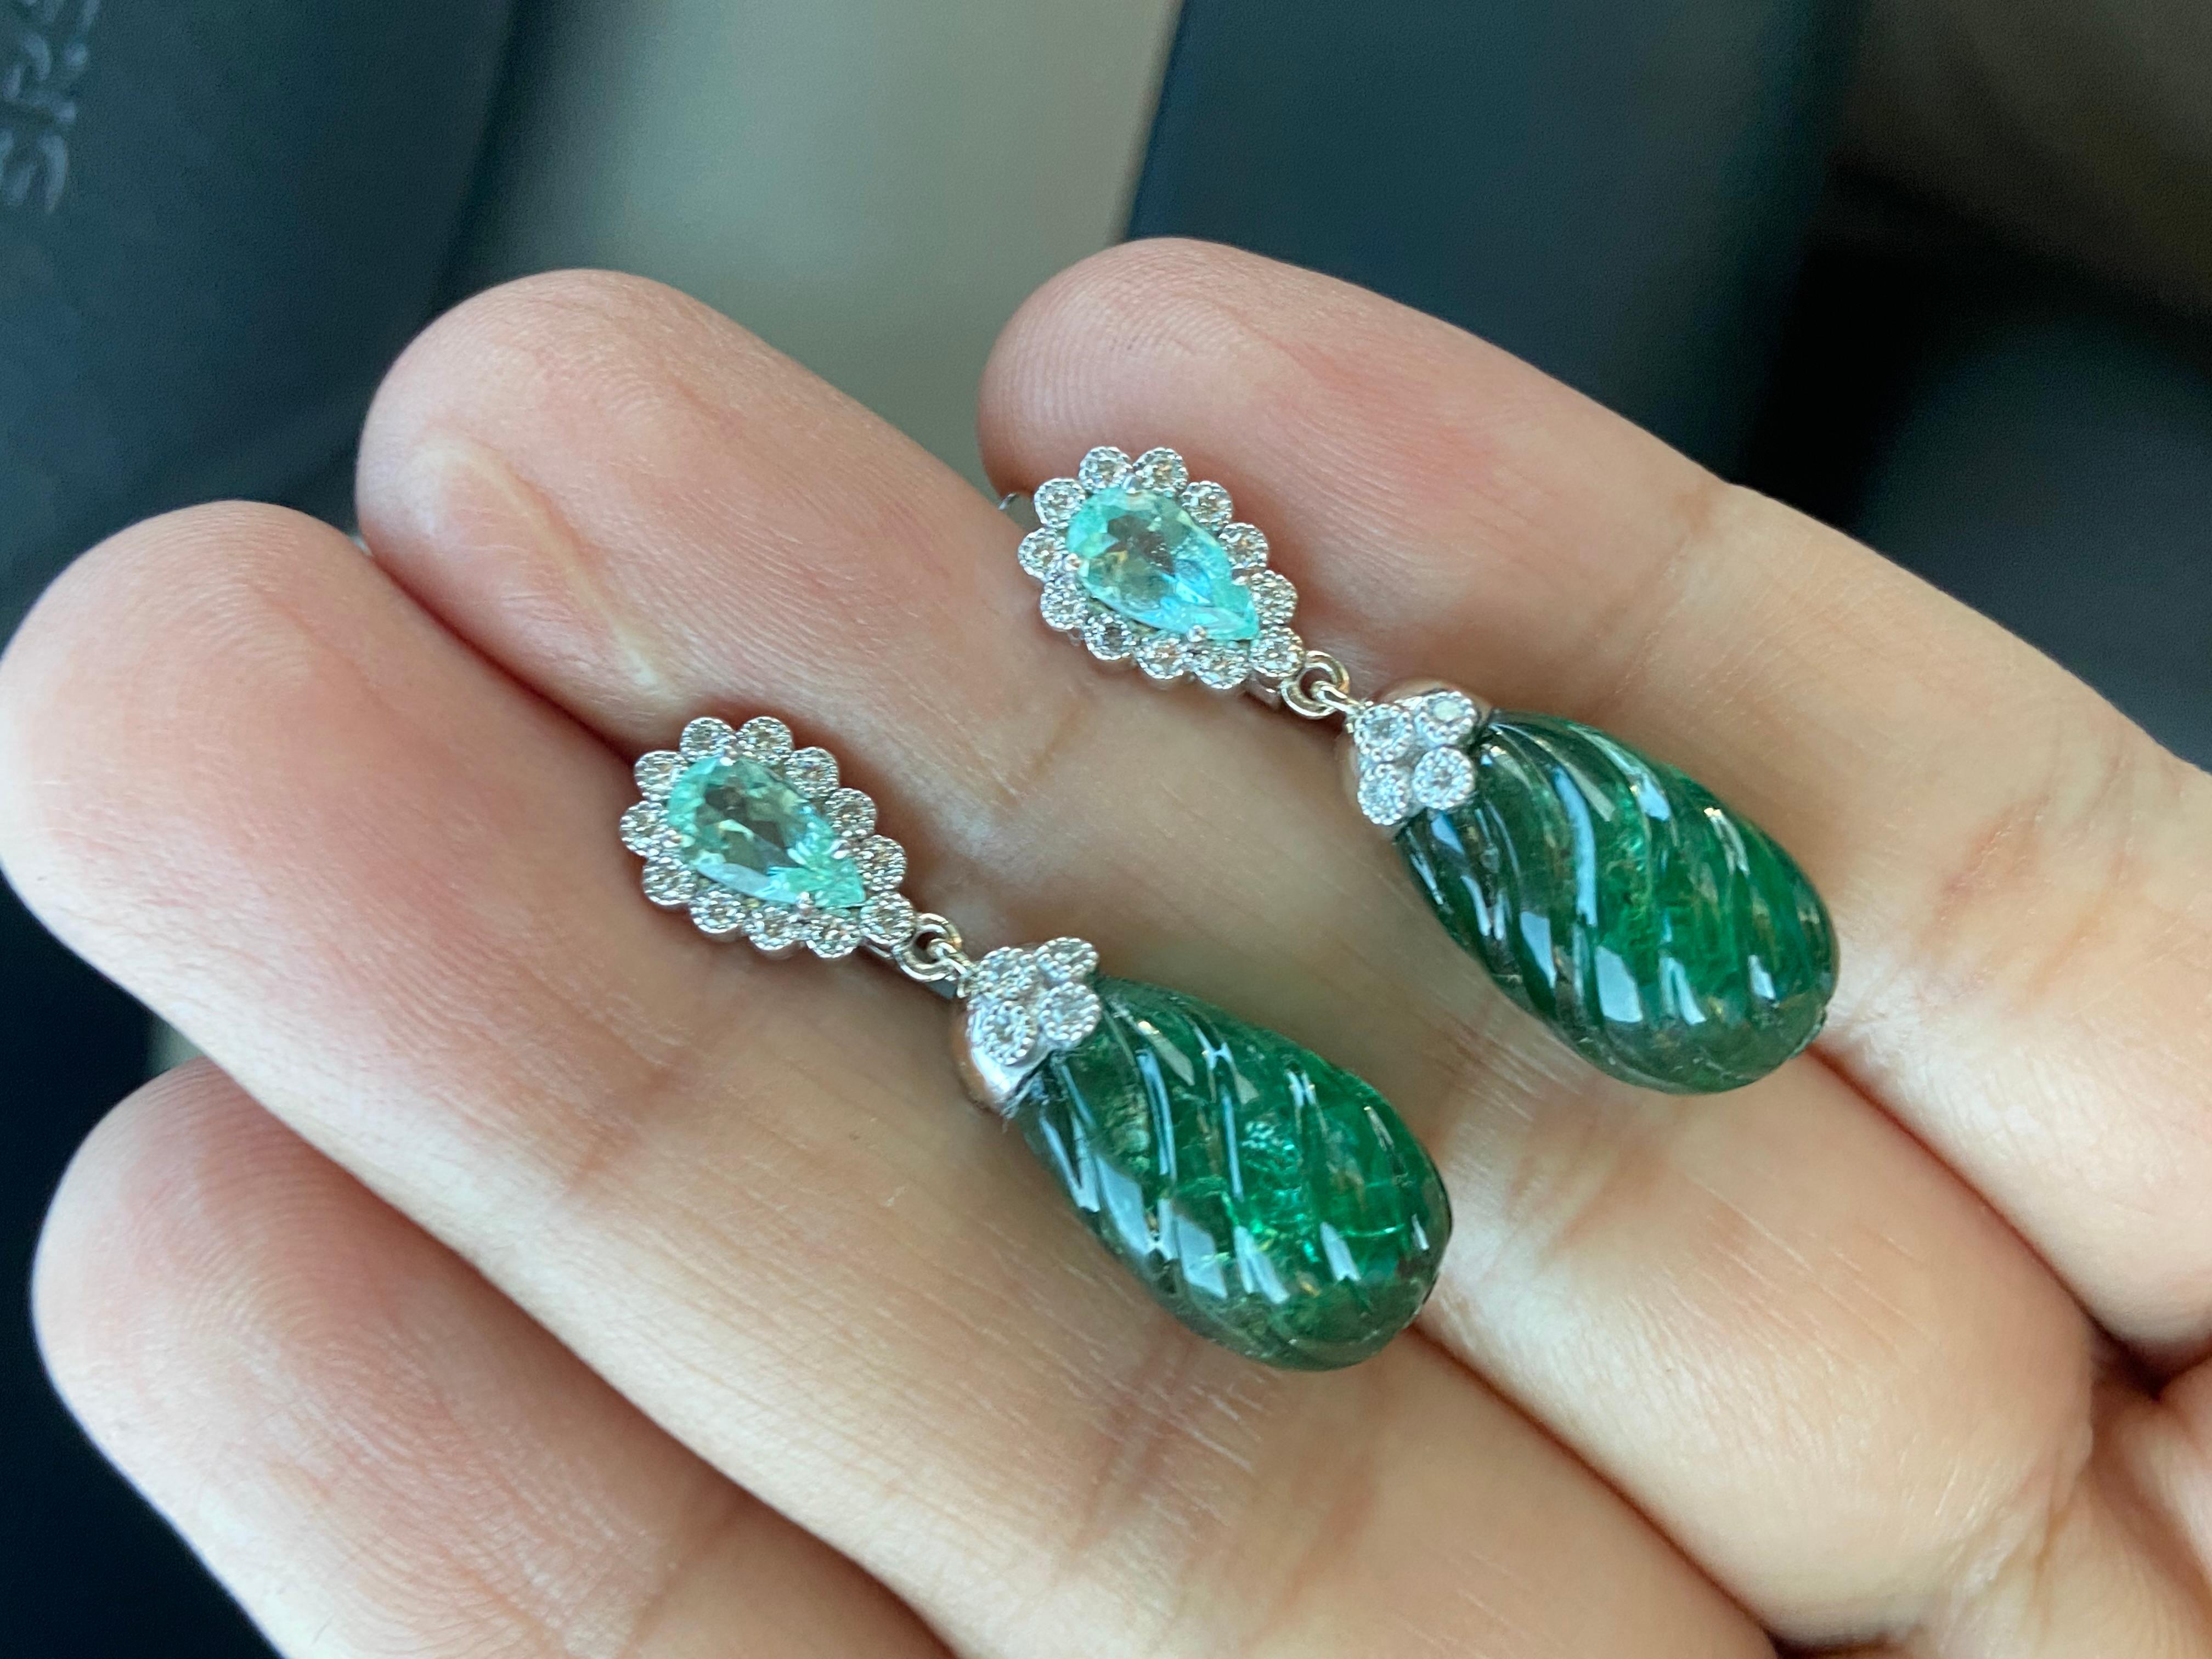 Contemporary 20.77ct Emeralds and 0.71ct Paraiba-type Tourmaline earrings. For Sale